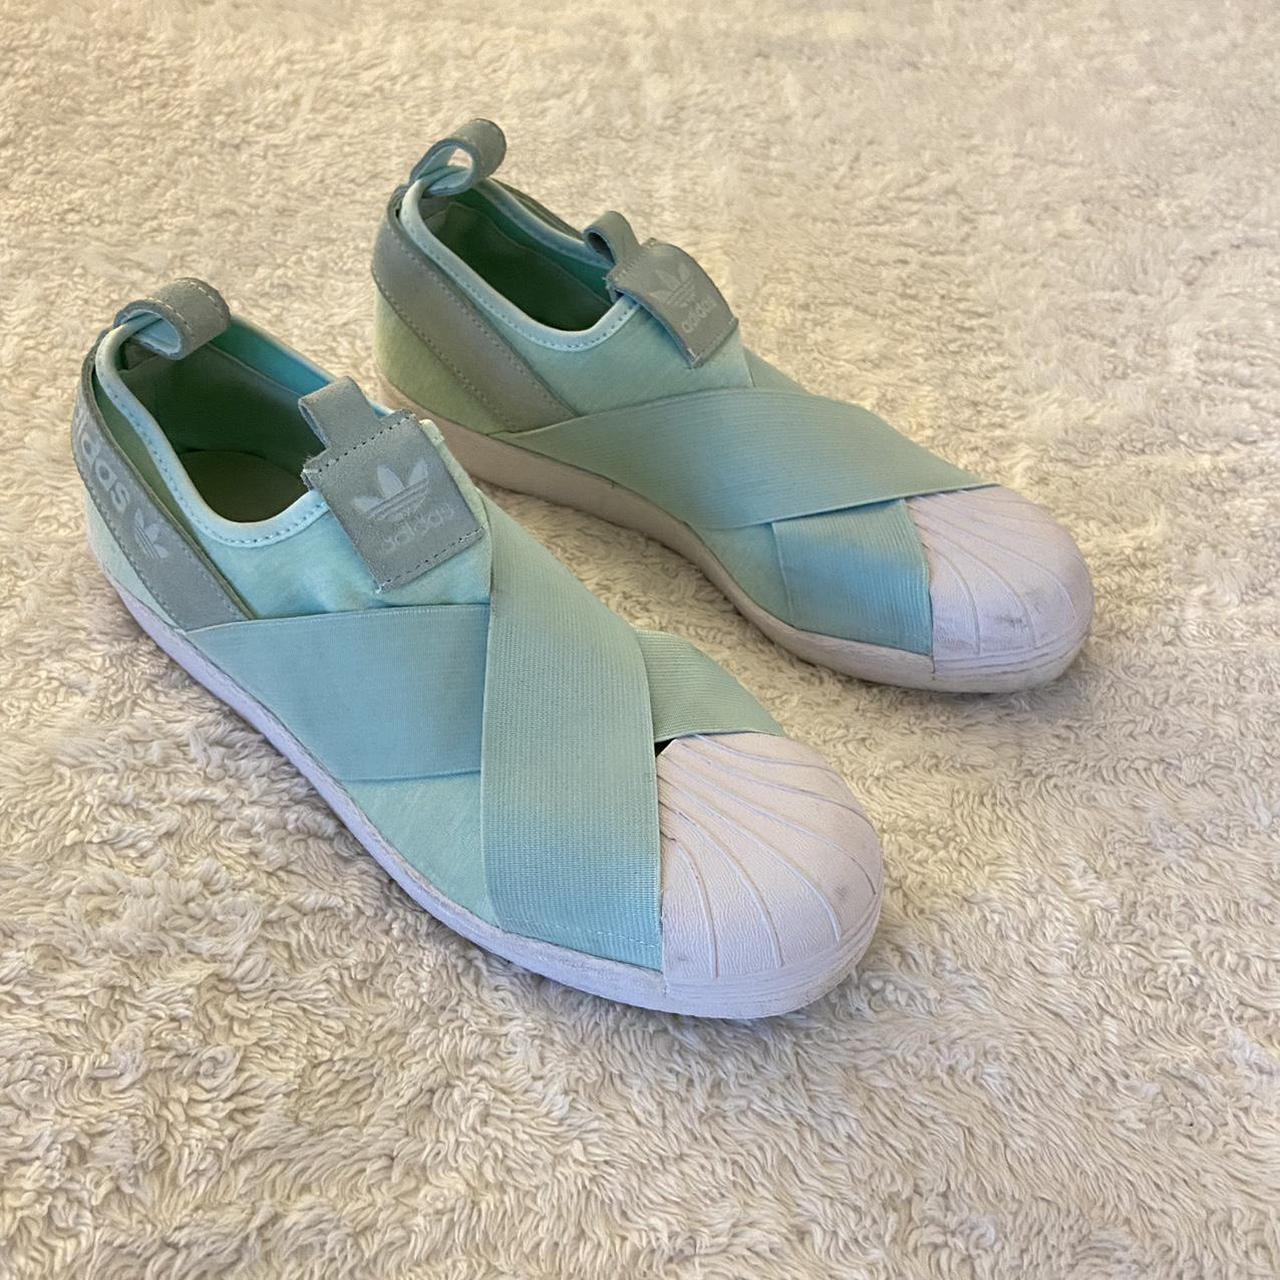 Product Image 1 - Turquoise Adidas Sneaker Shoes

Size 8